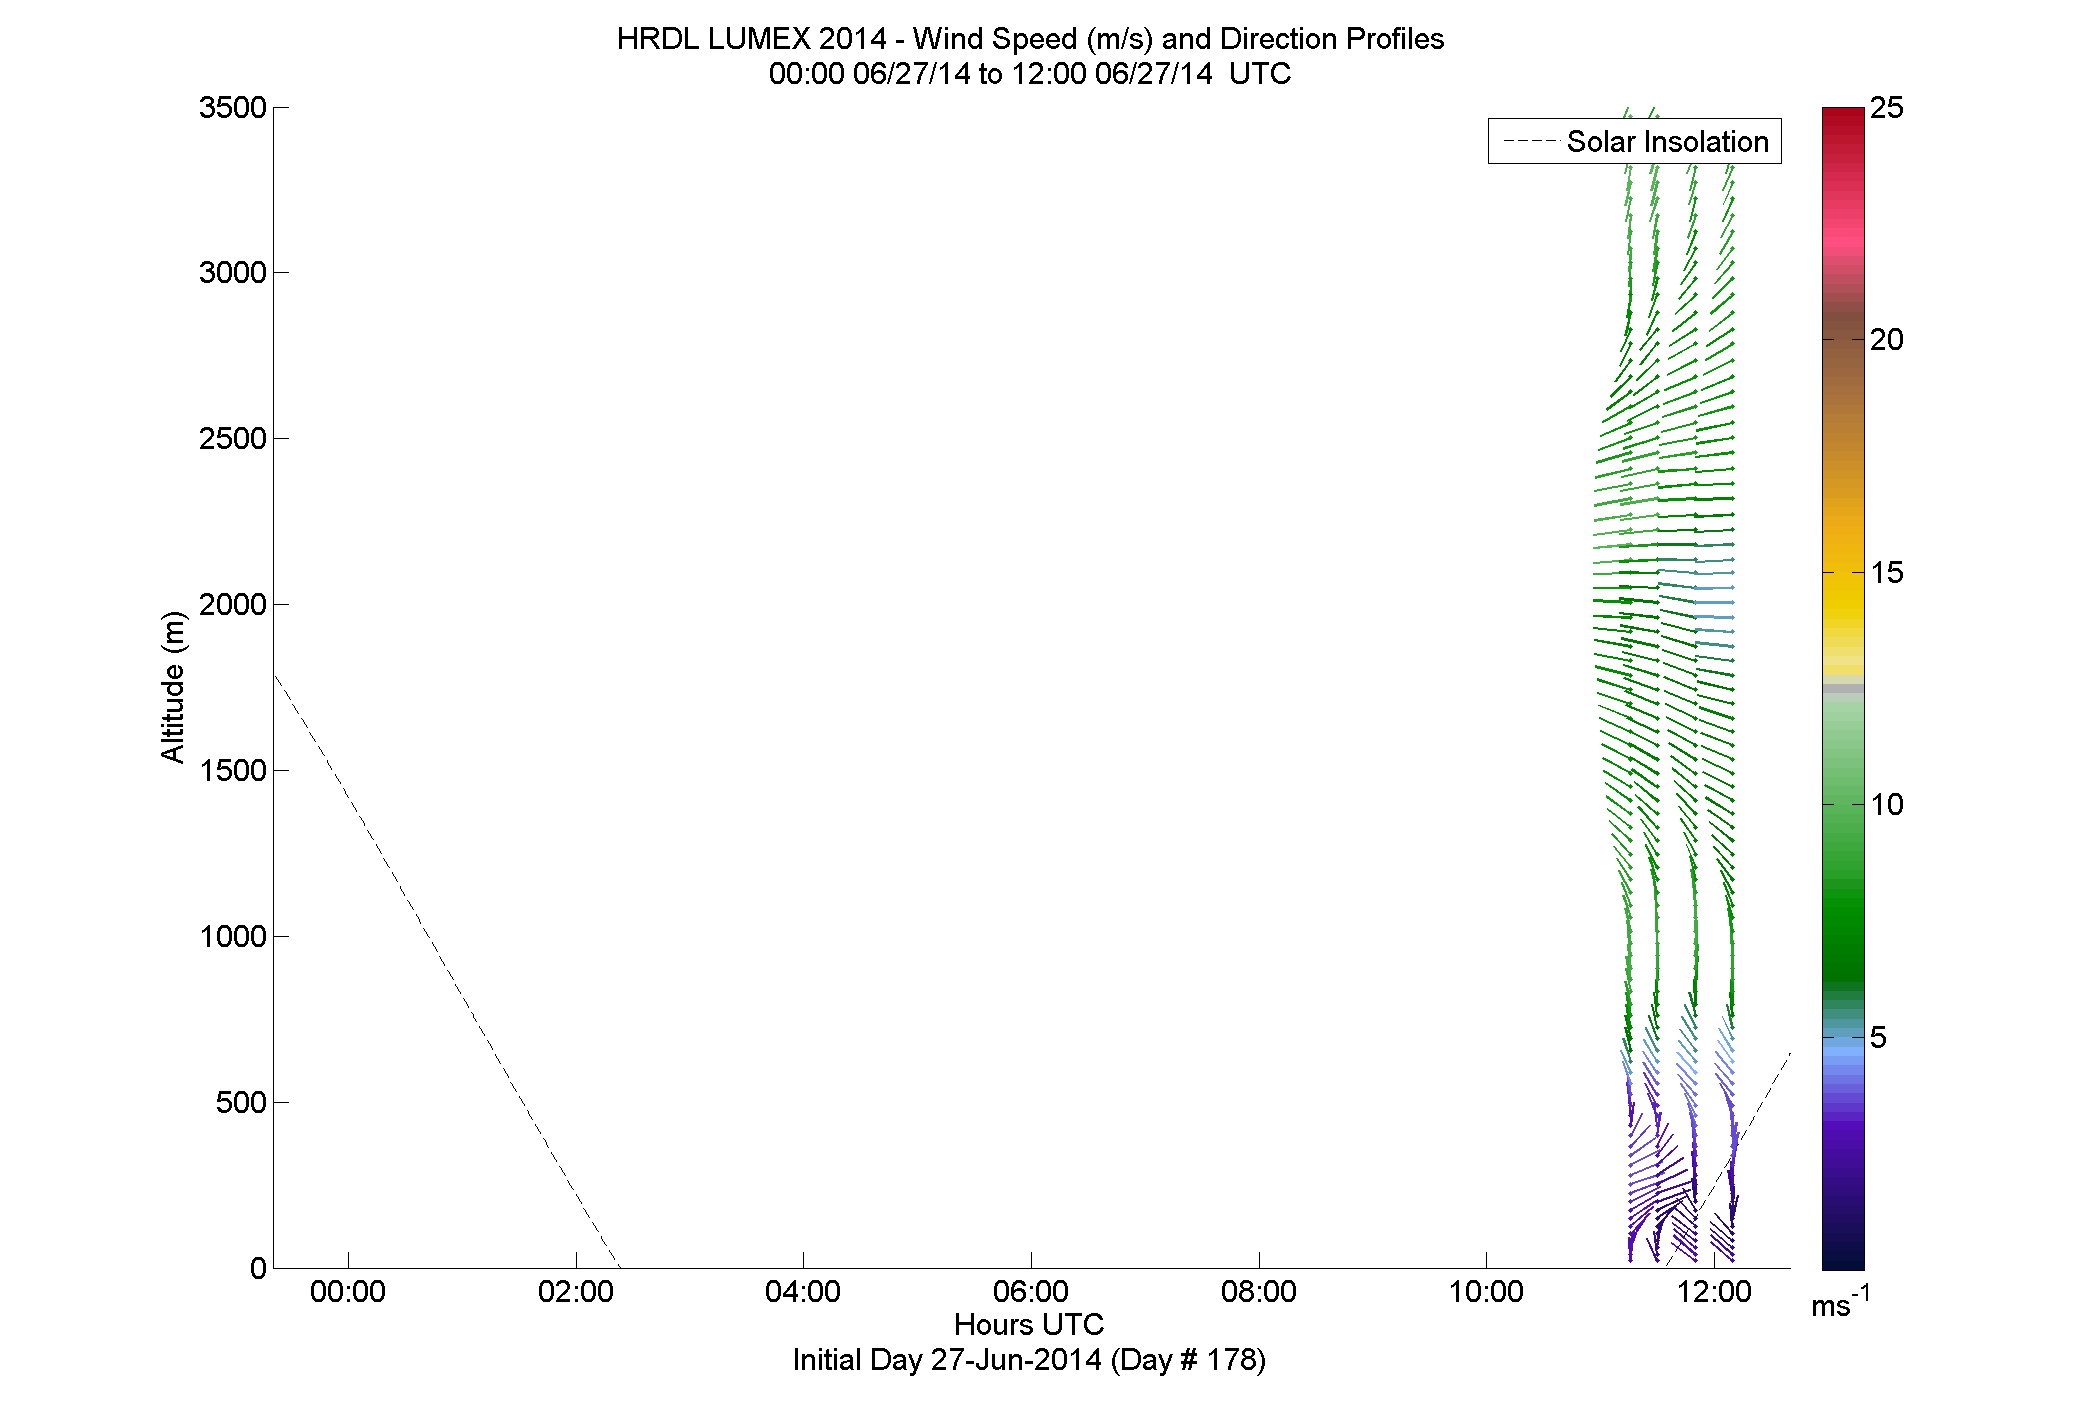 HRDL speed and direction profile - June 27 am